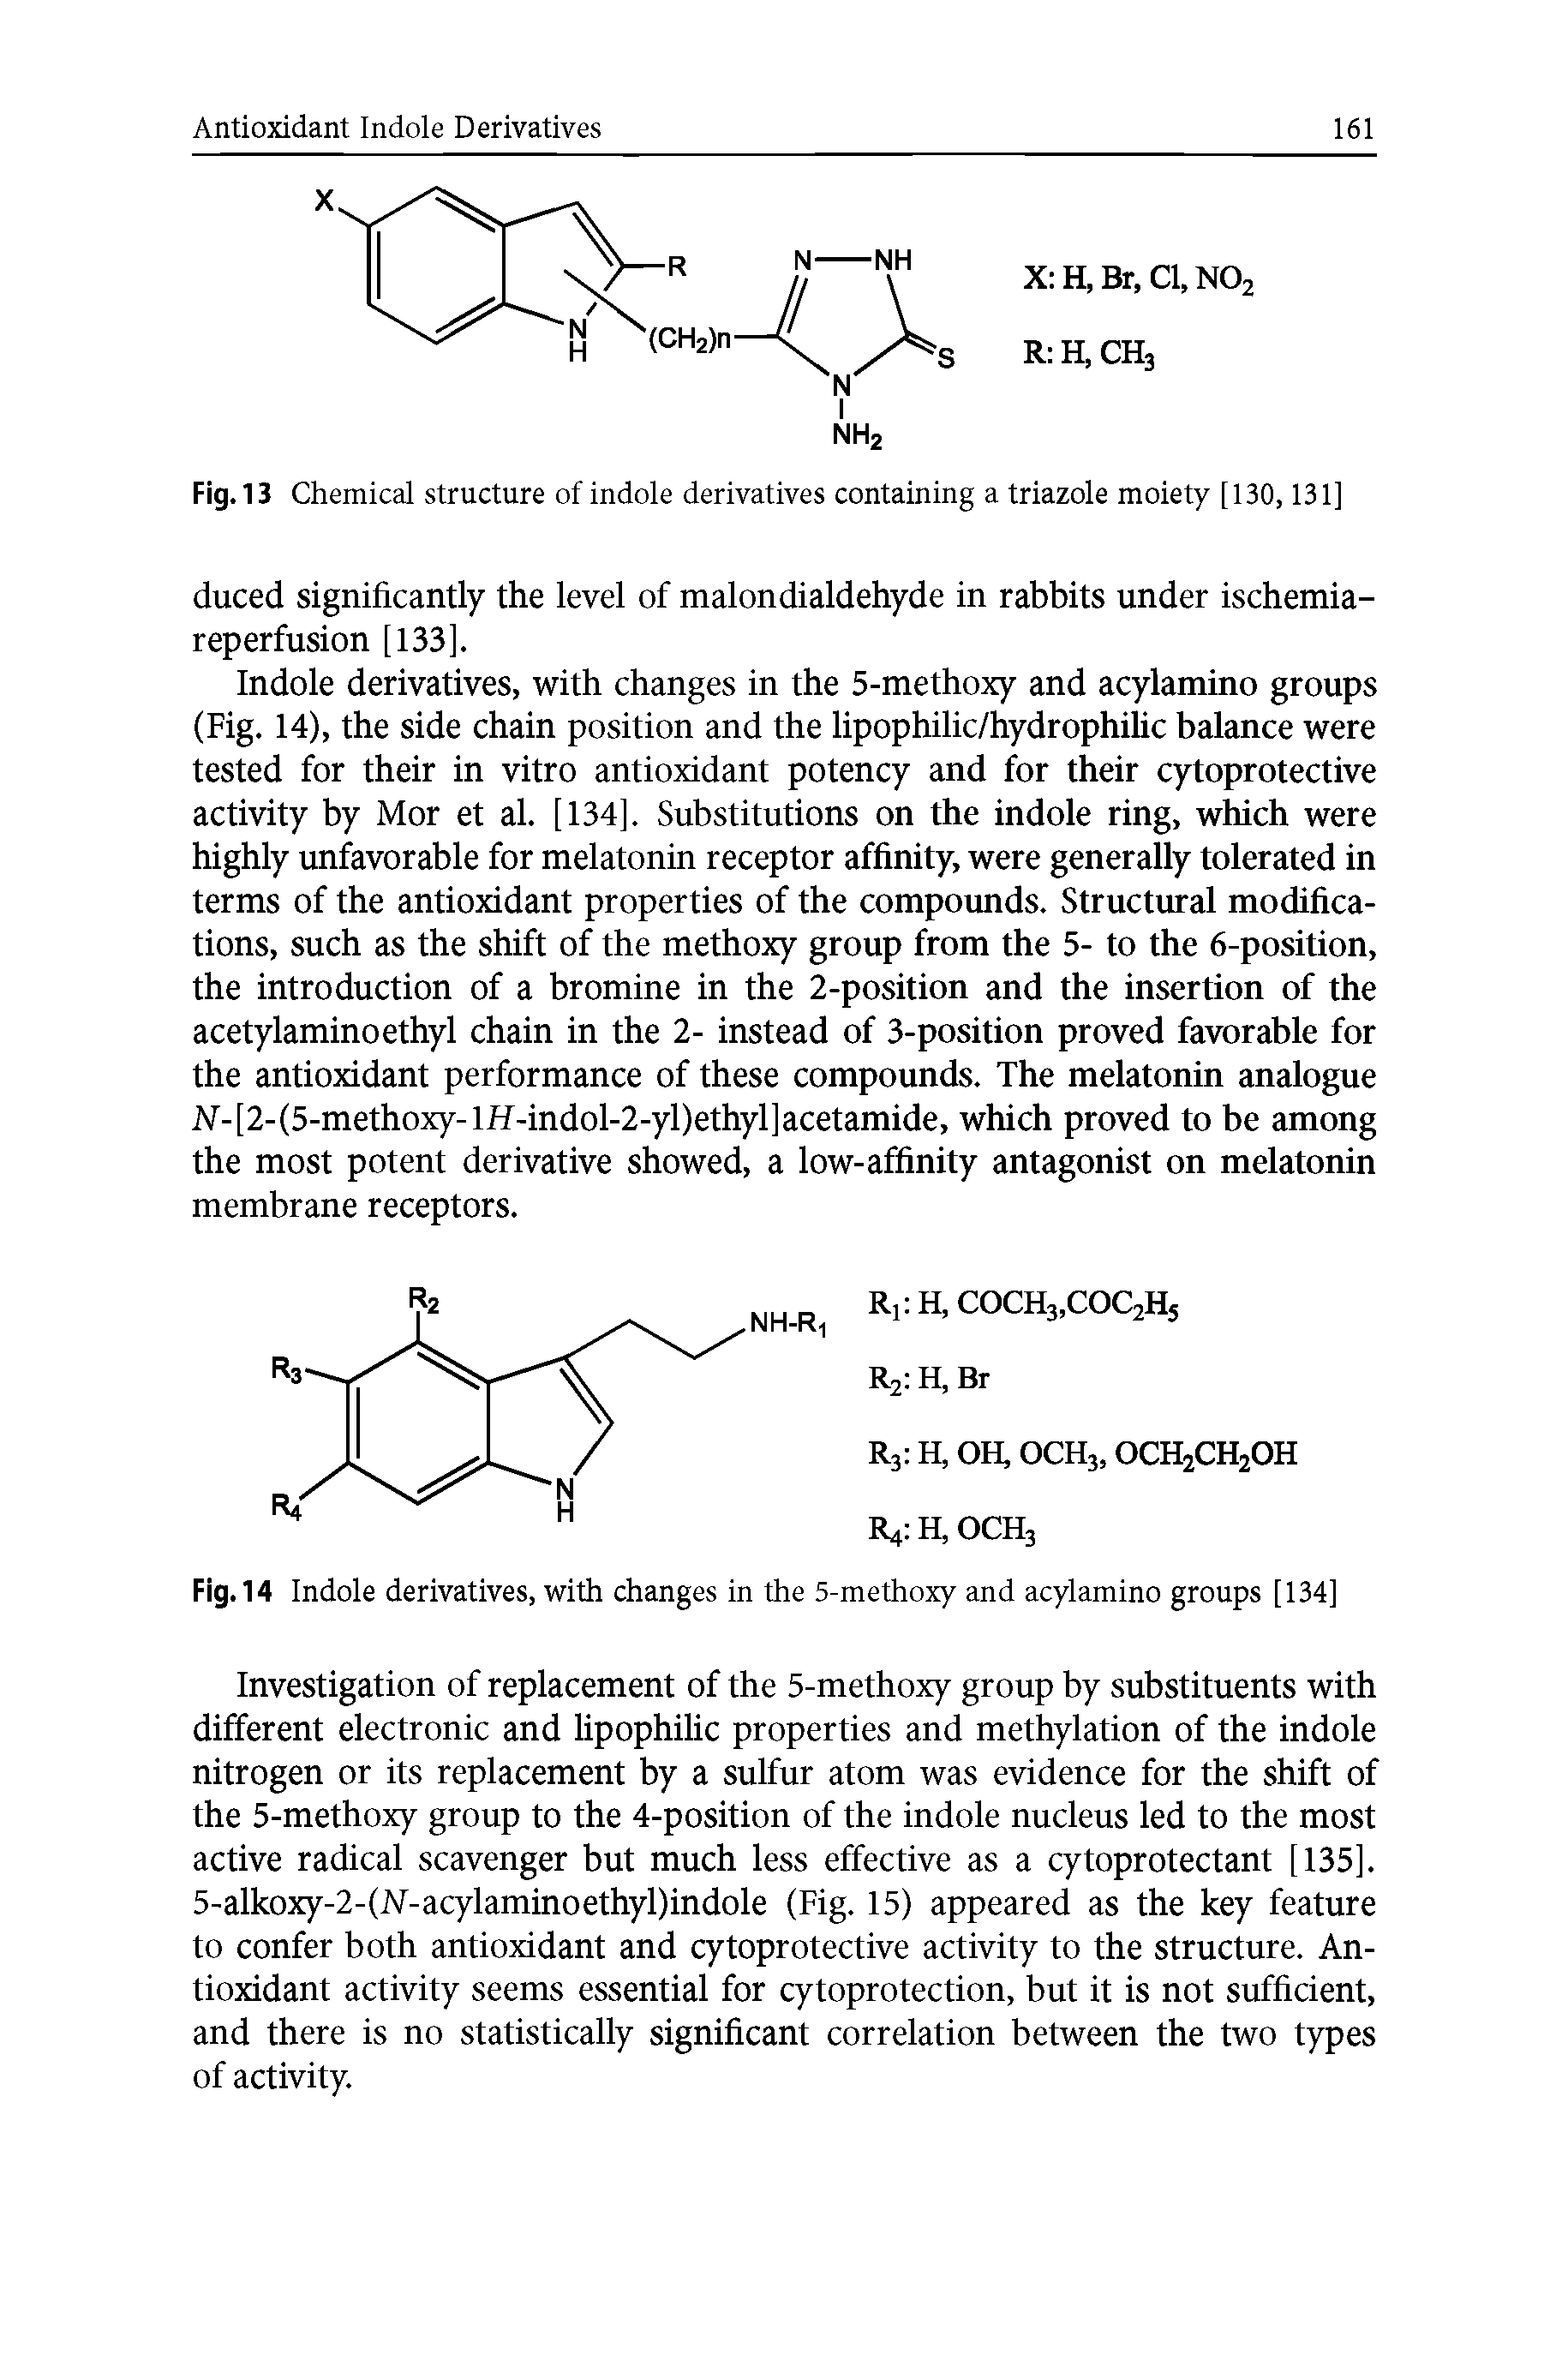 Fig. 14 Indole derivatives, with changes in the 5-methoxy and acylamino groups [134]...